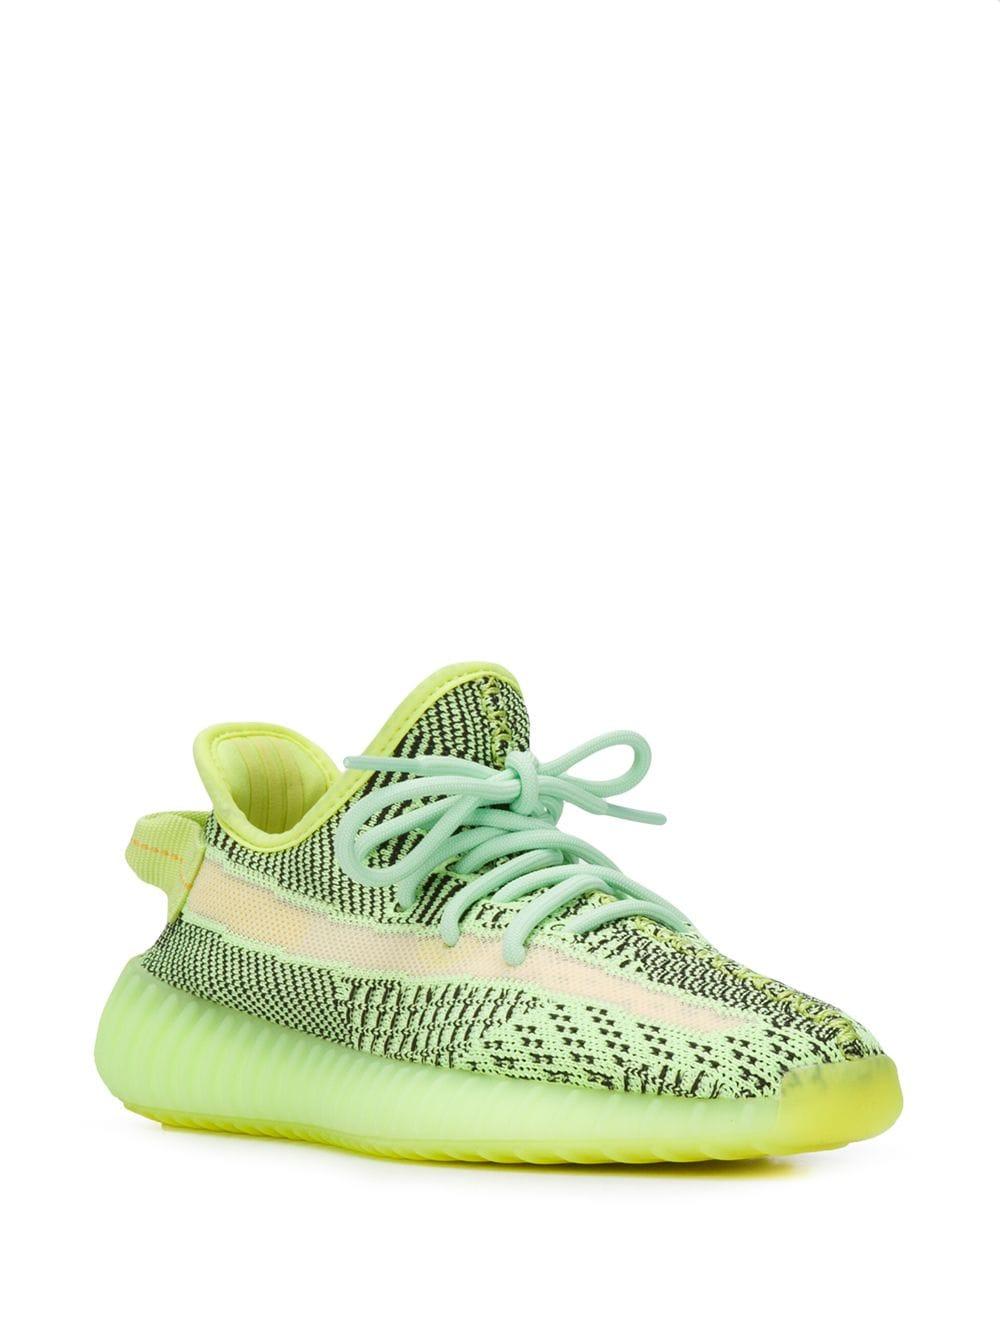 adidas Yeezy Boost 360 V2 Sneakers in Green | Lyst